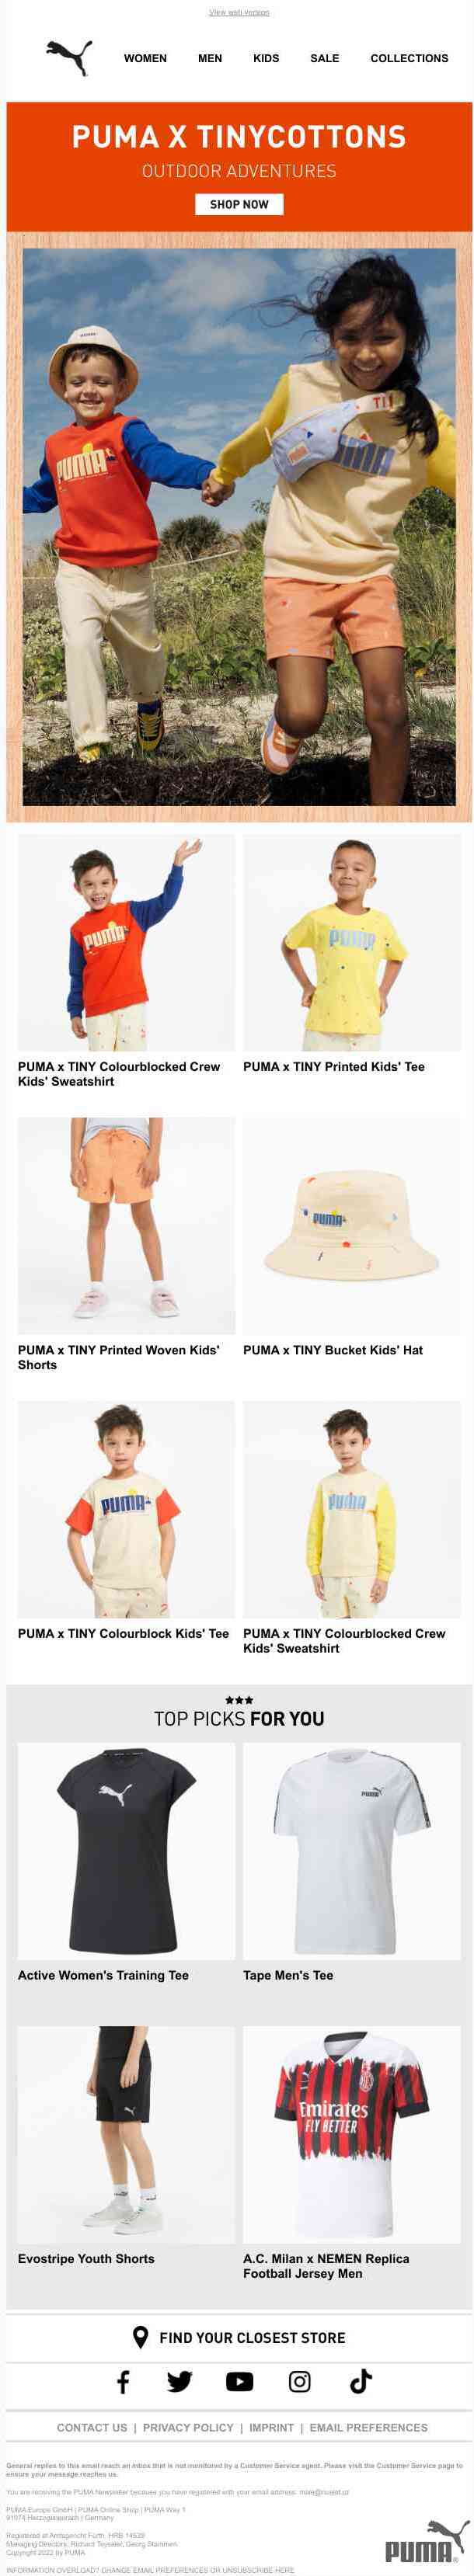 For the Kids: PUMA x TINYCOTTONS